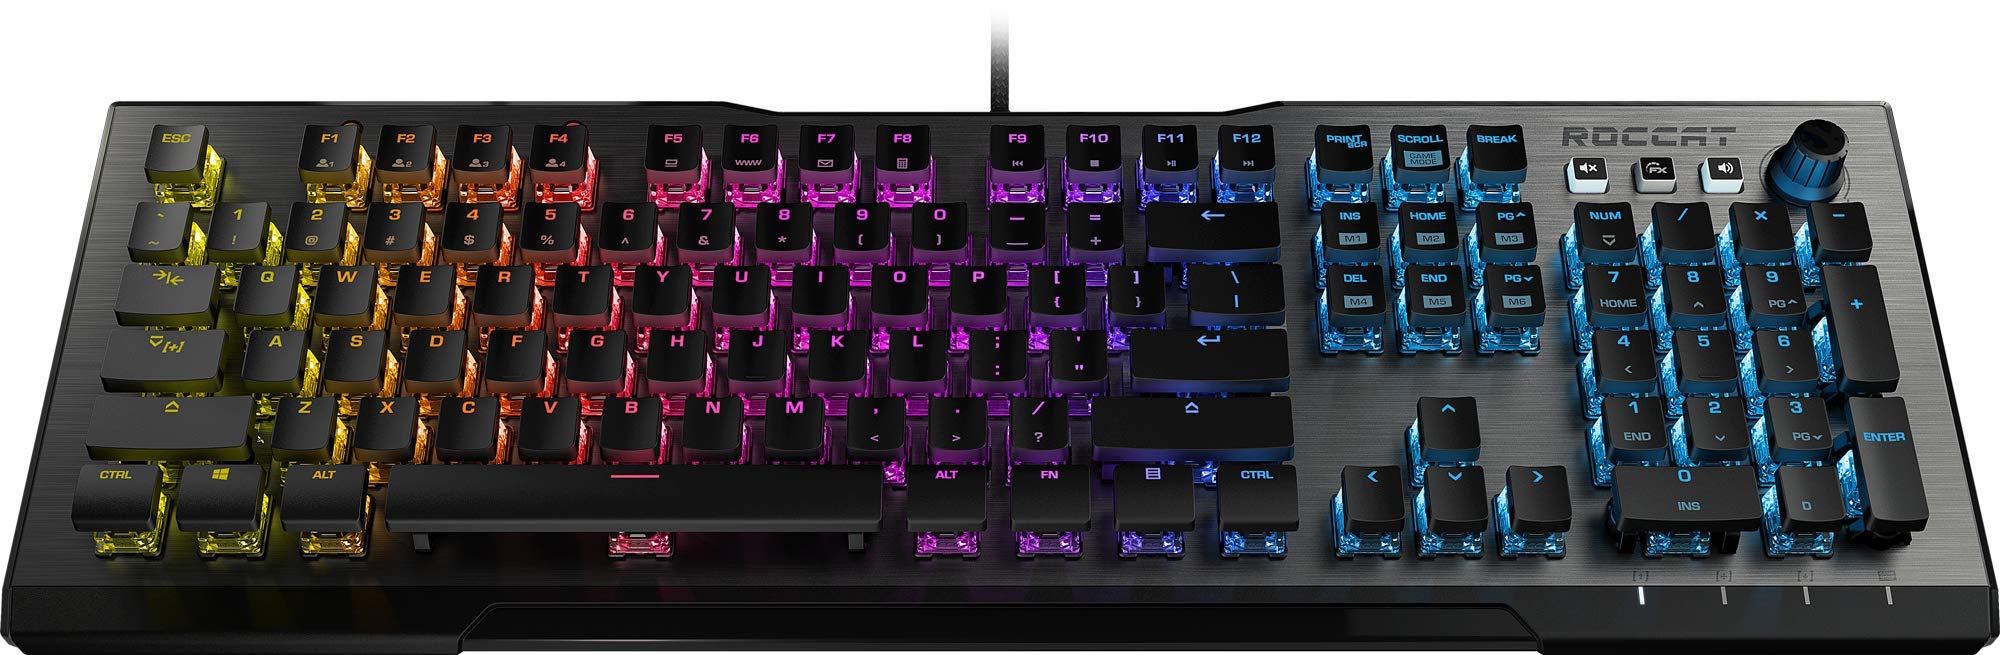 ROCCAT Vulcan 100 AIMO Mechanical PC Gaming Keyboard, RGB Lighting, Silent, Per Key LED Illumination, Brown Switches, Aluminum Top Plate, Silver